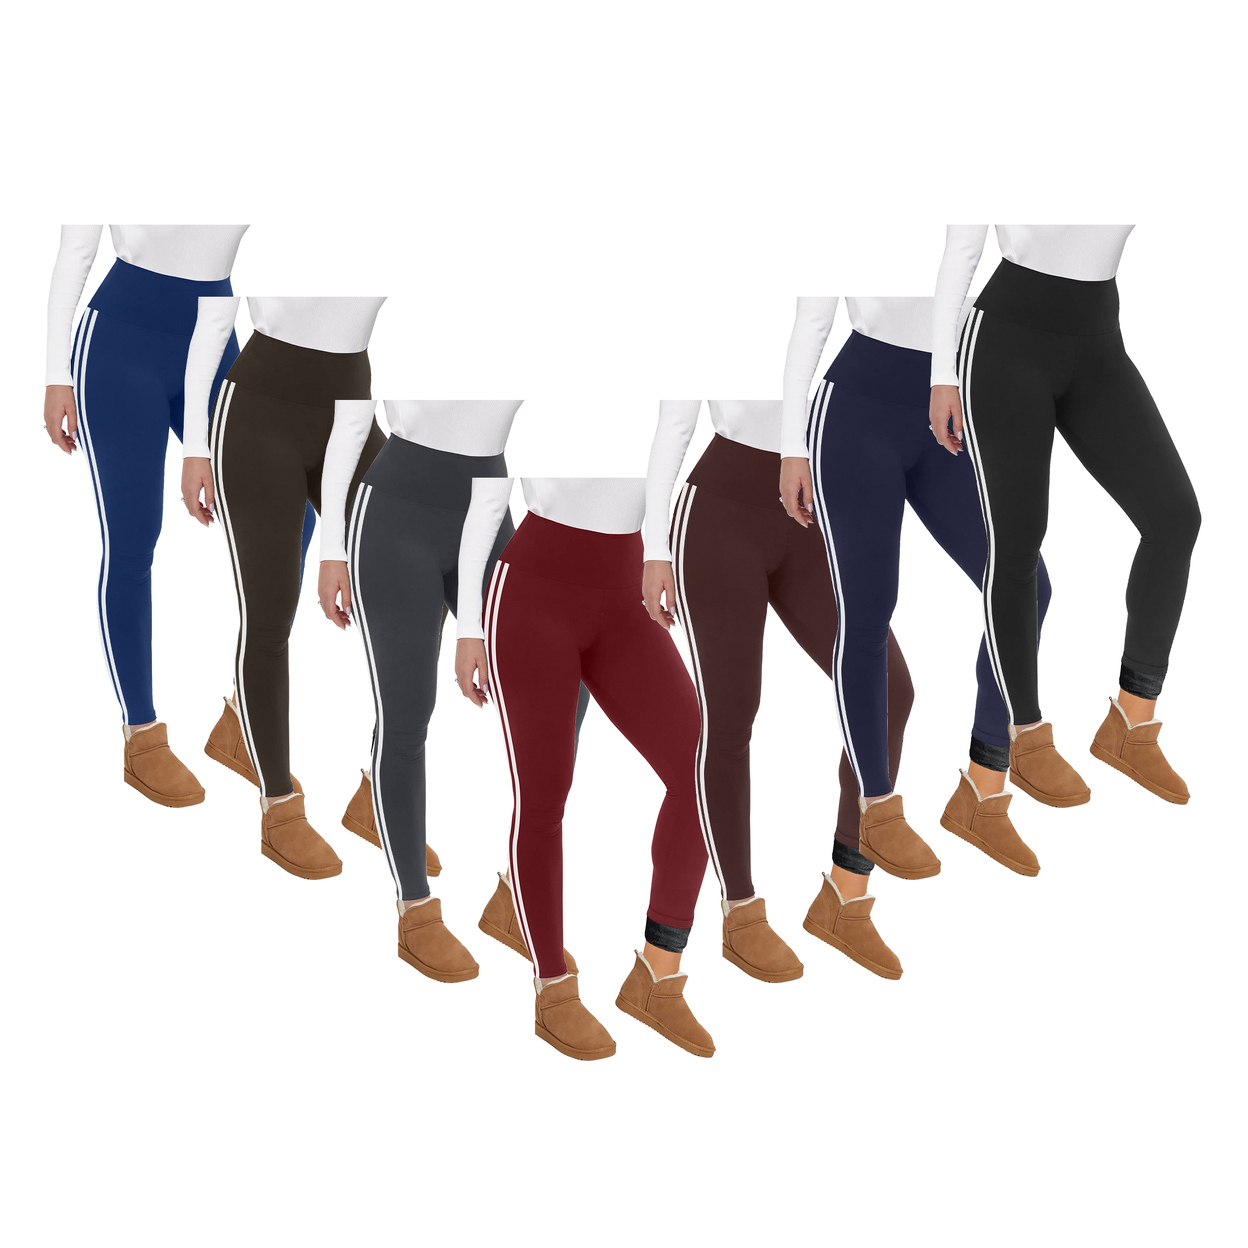 Multi-Pack: Women's Ultra Soft Winter Warm Cozy Striped Fur Lined Yoga Leggings - 1-pack, Assorted, Large